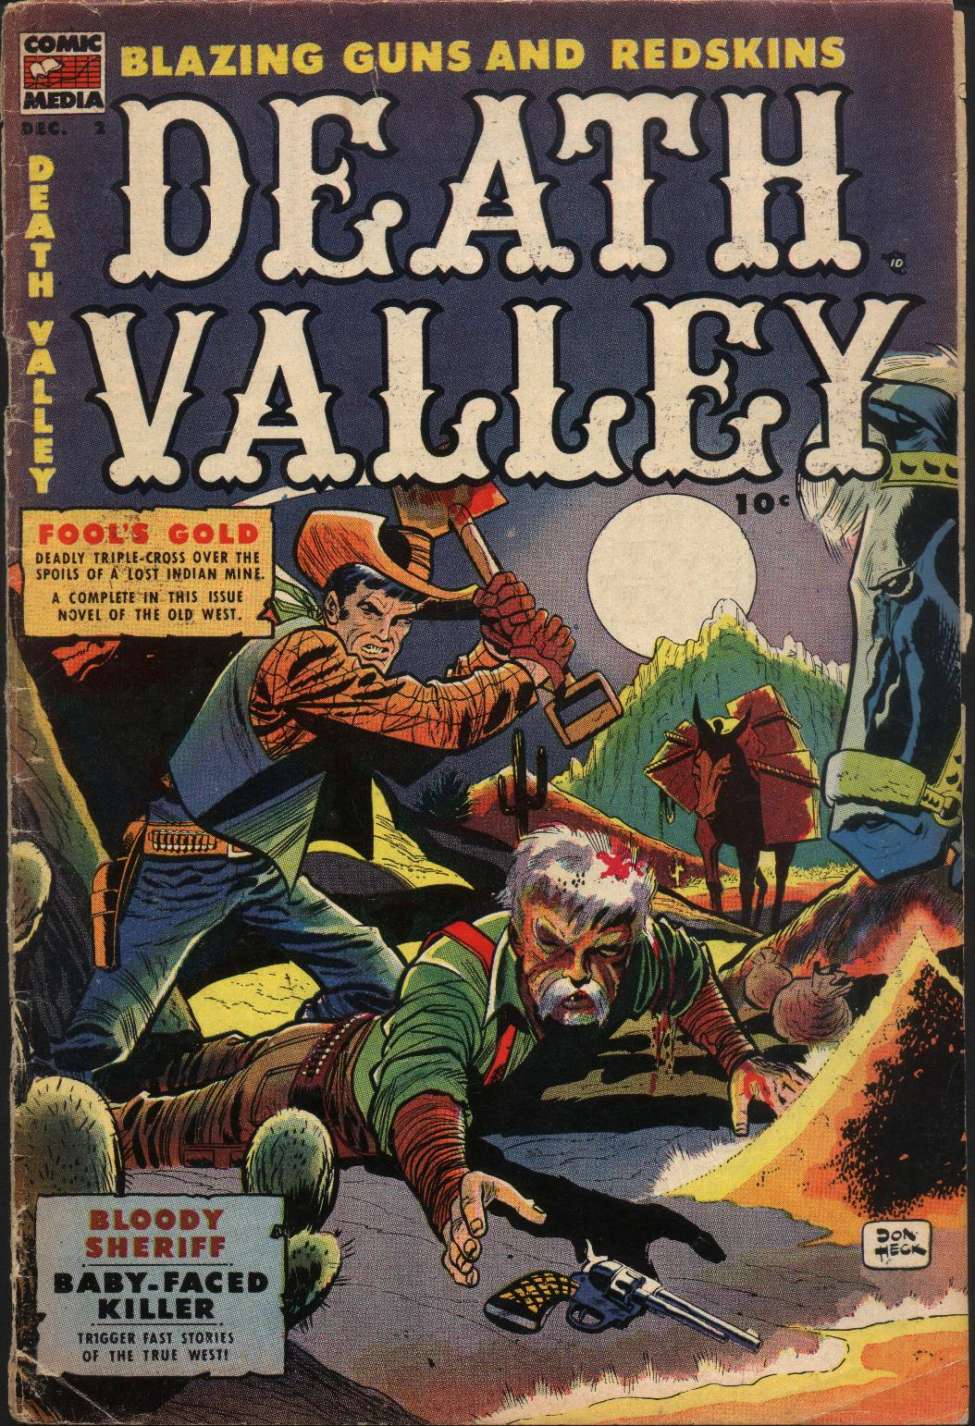 Comic Book Cover For Death Valley 2